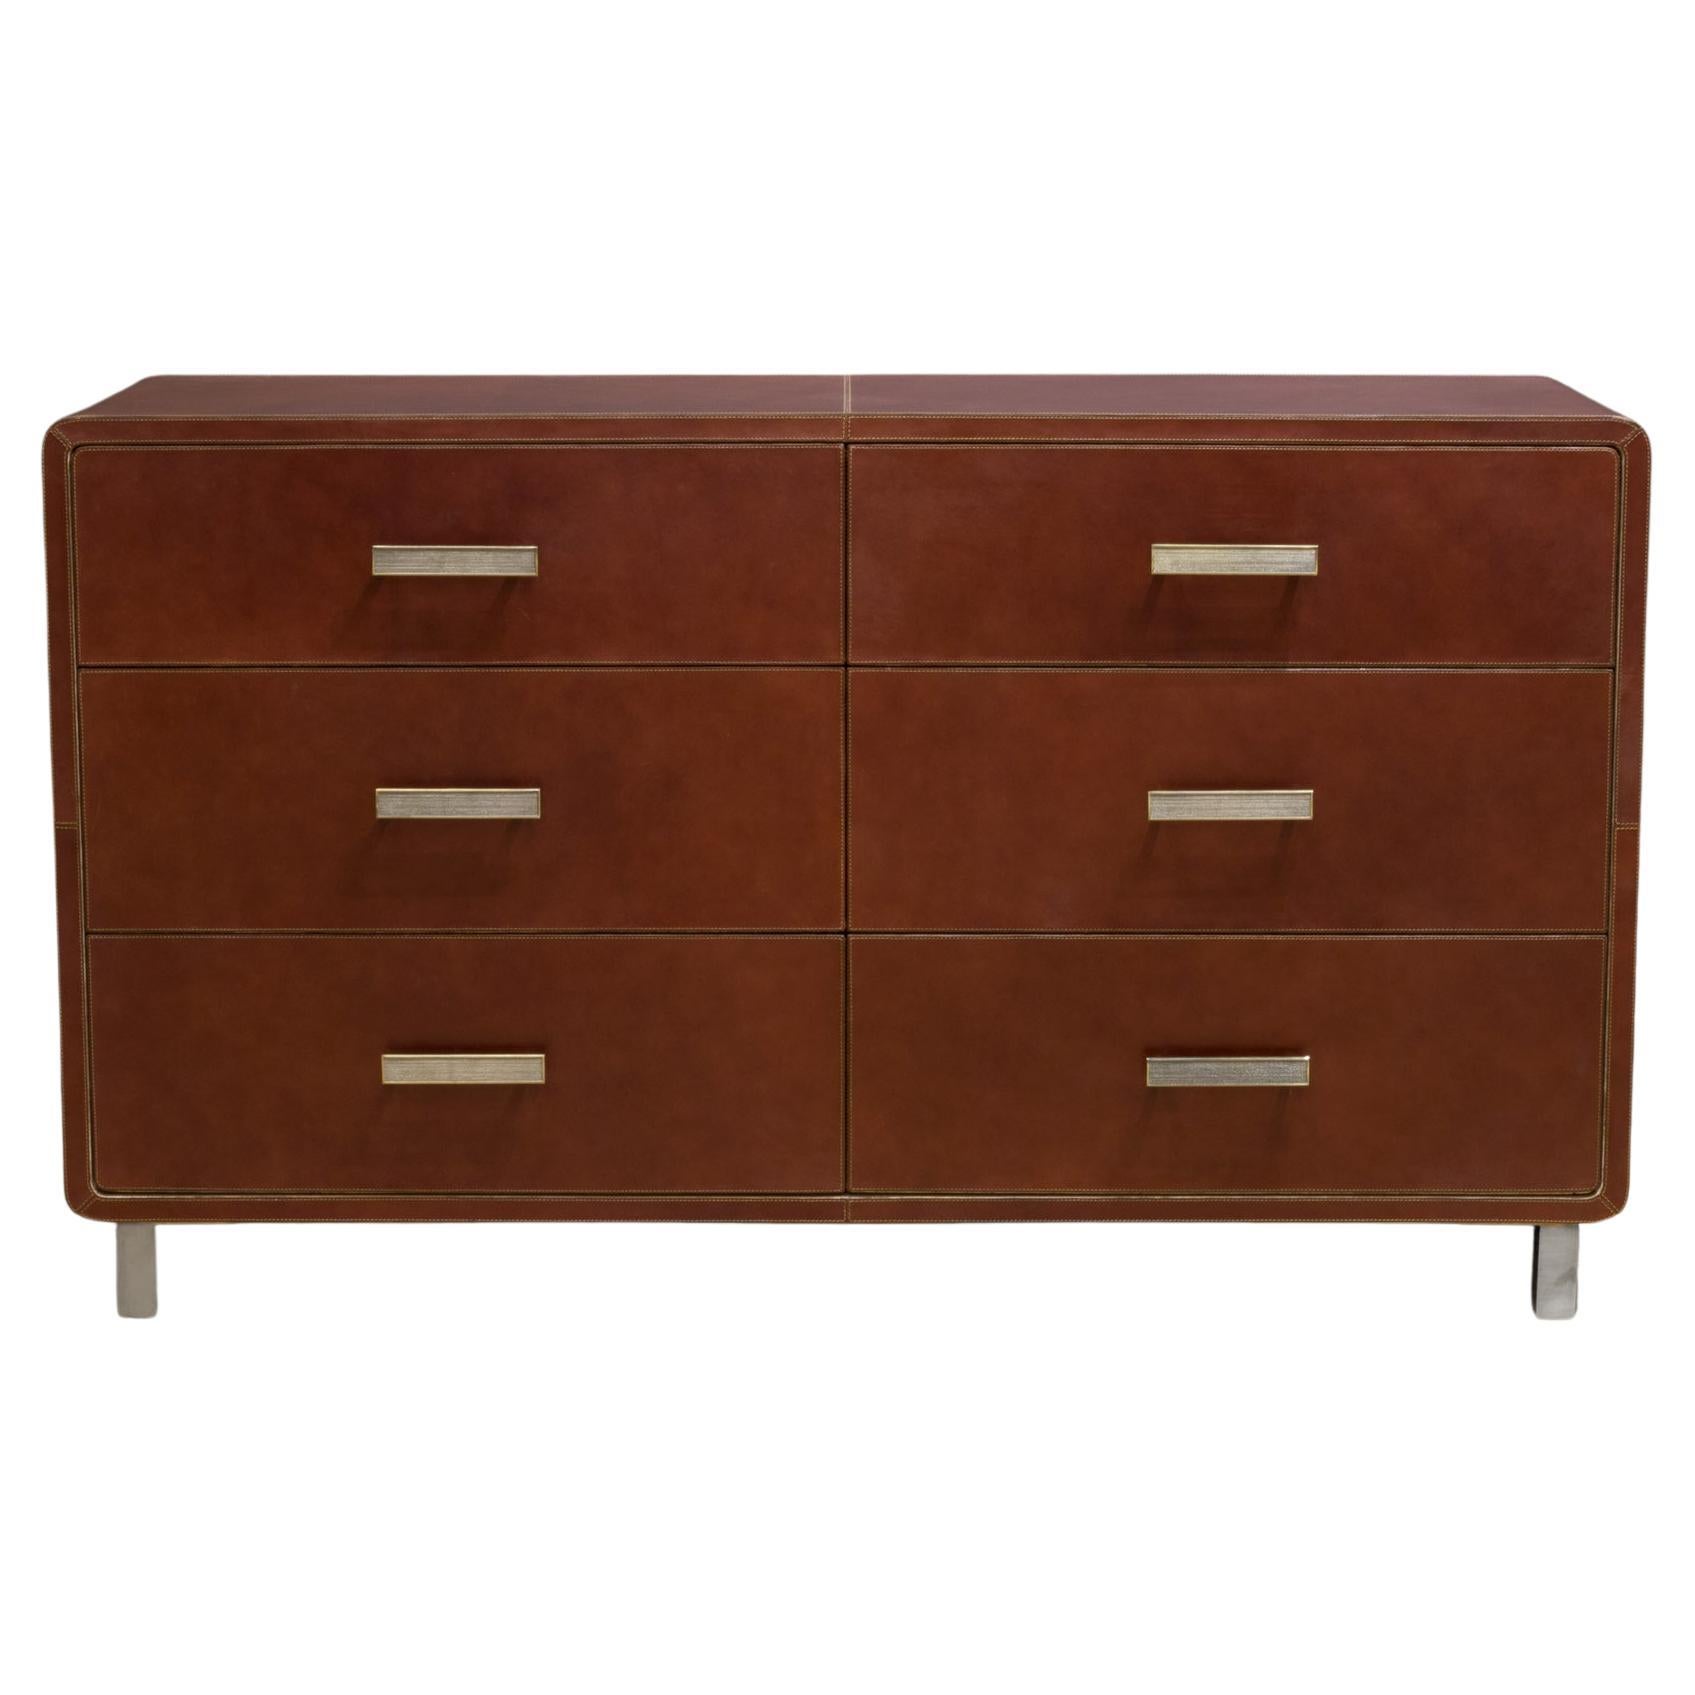 Aged Leather Dresser by Made Goods